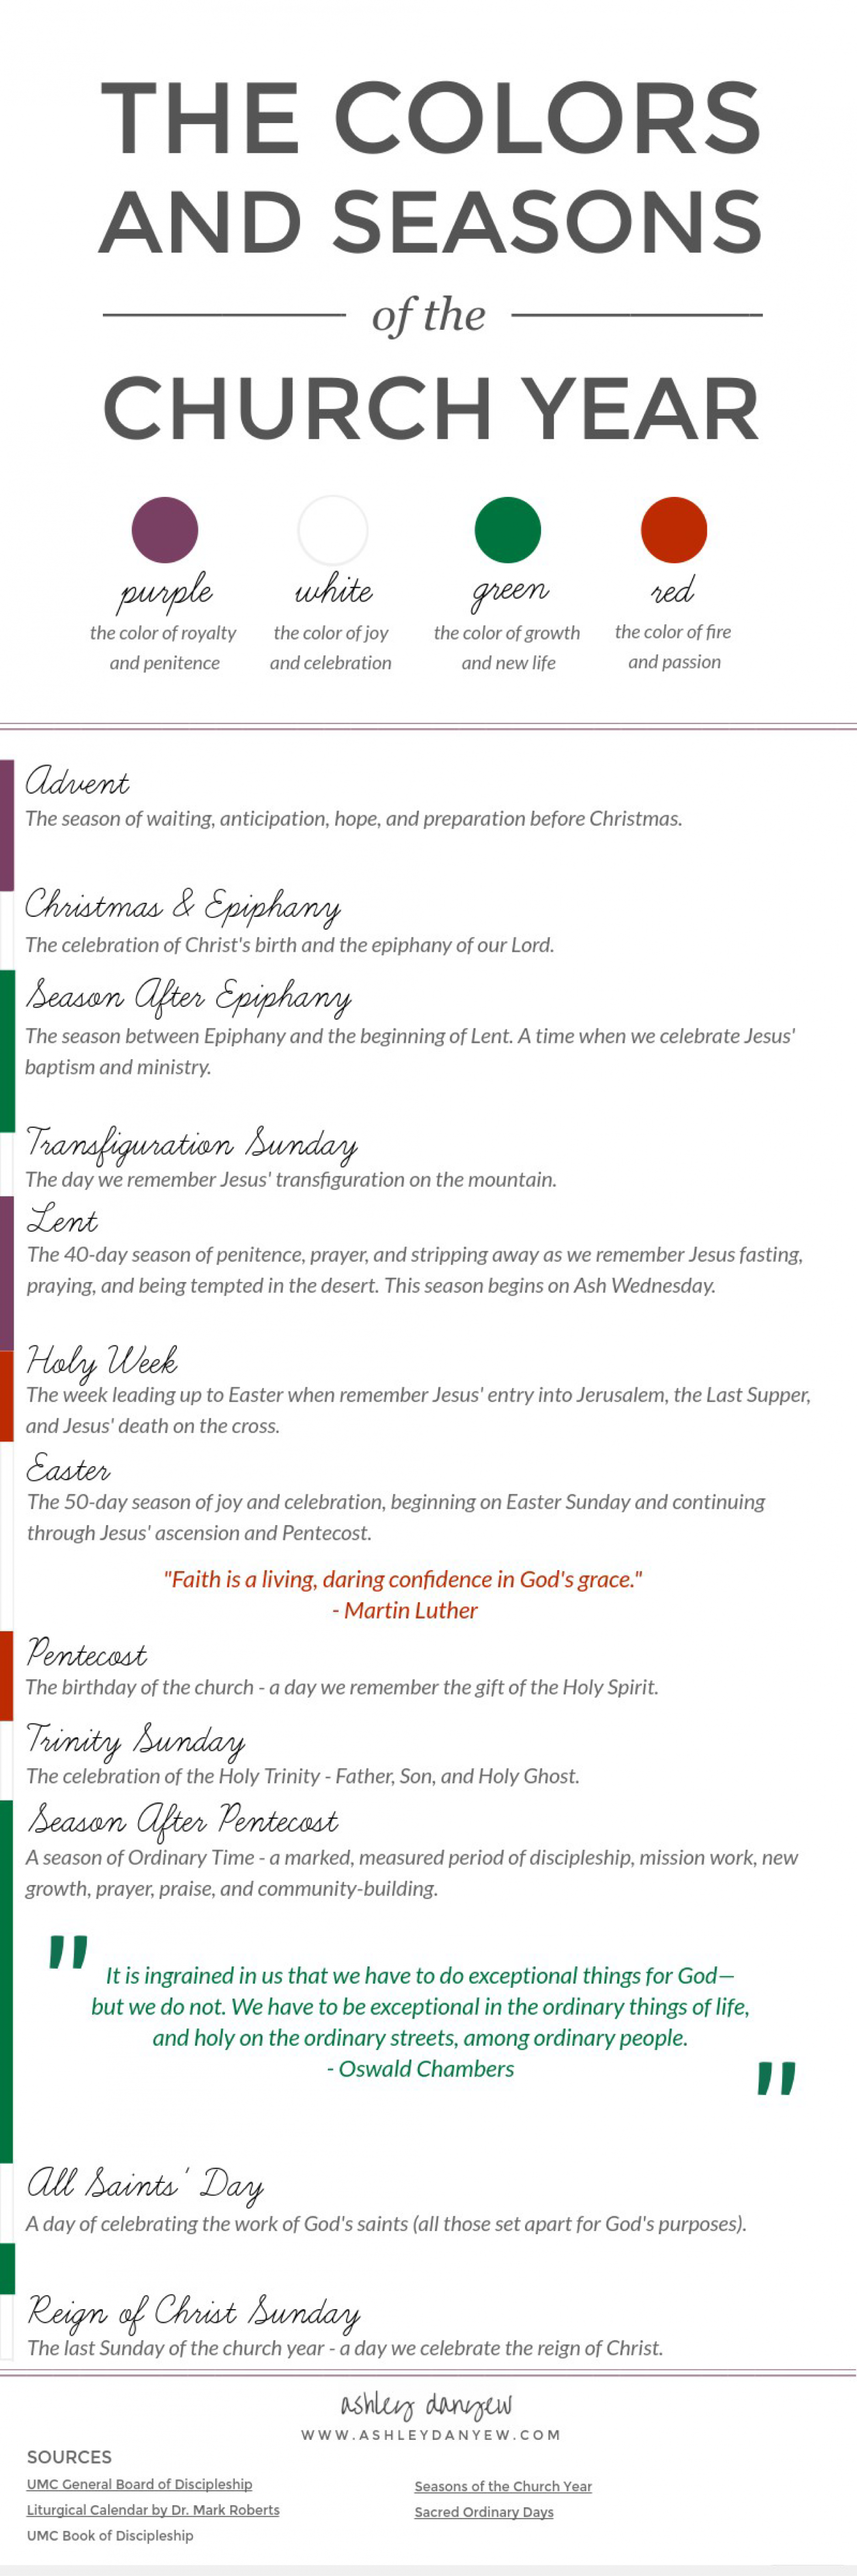 The Colors and Seasons of the Church Year [Infographic]  Ashley